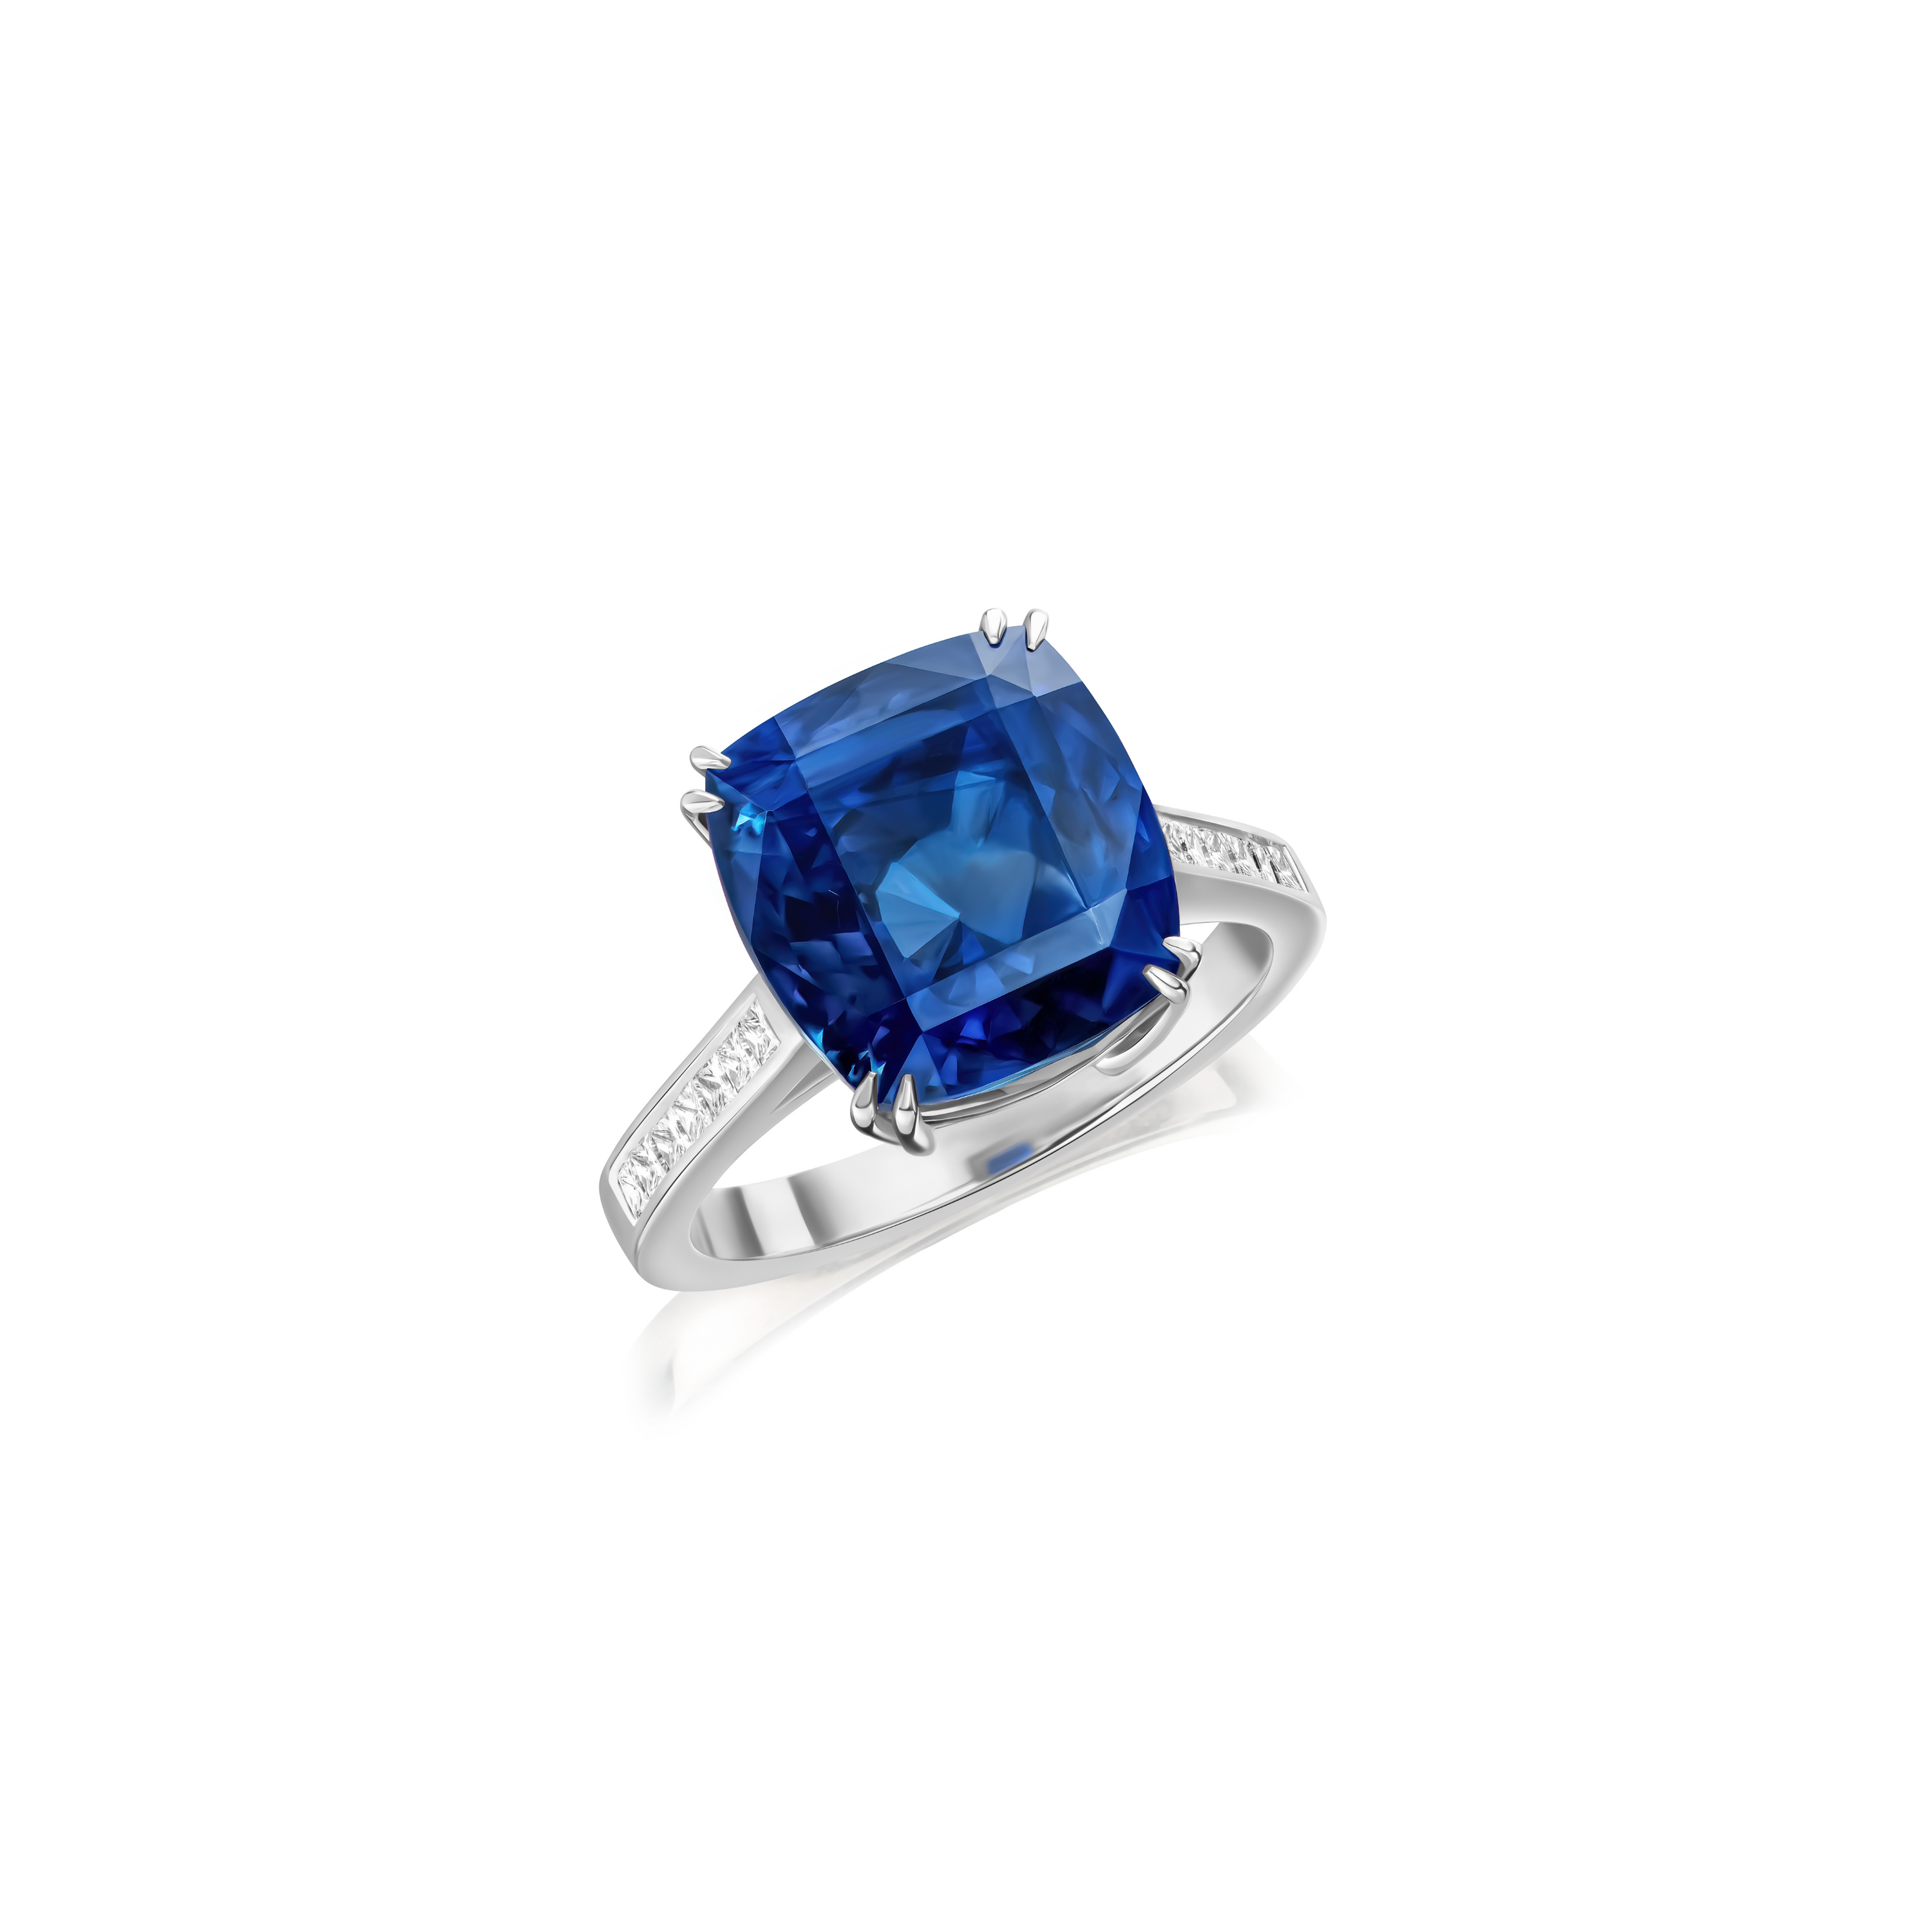 11.92cts Sapphire Ring with Diamond Set Shoulders